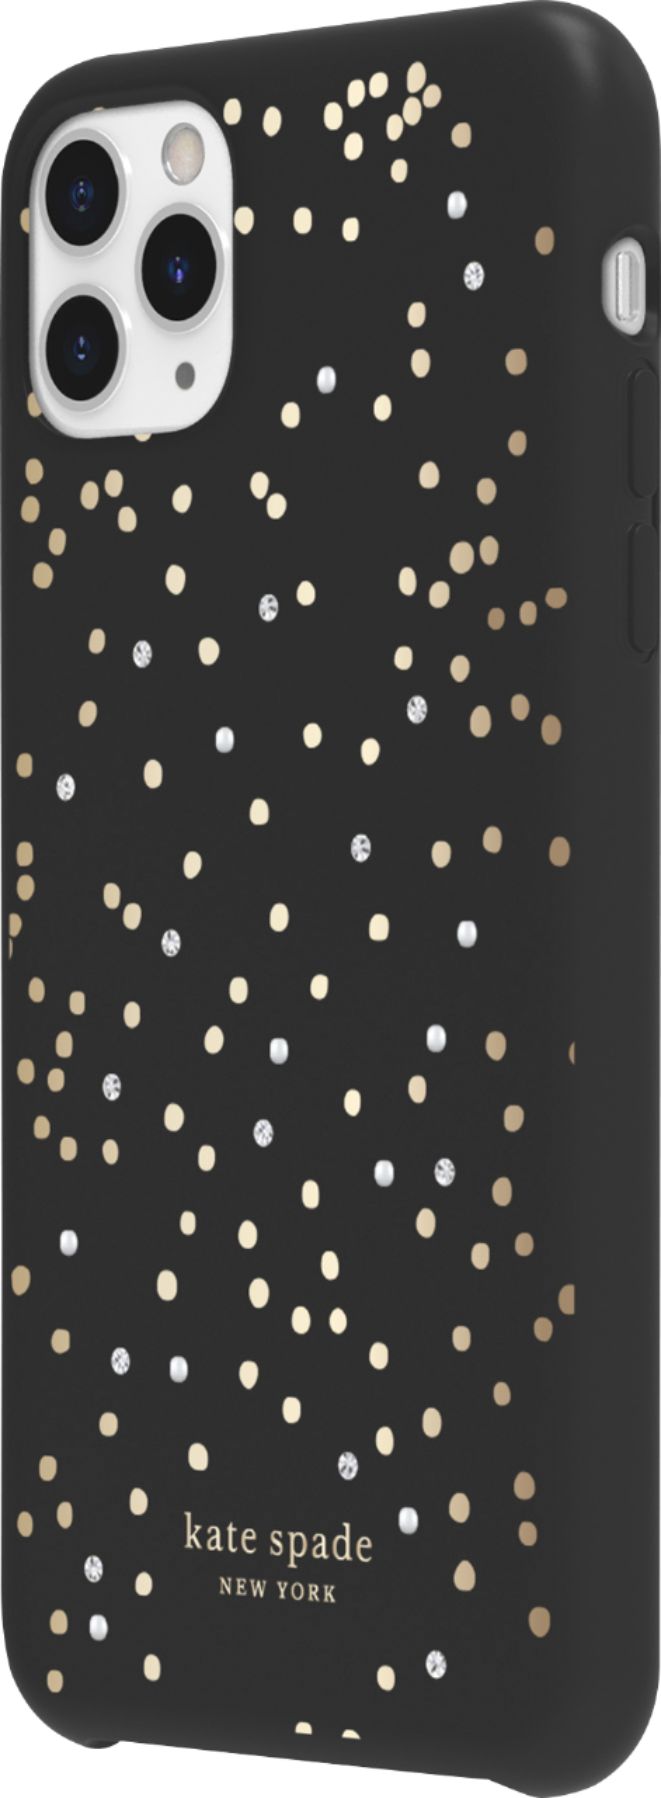 Left View: kate spade new york - Protective Hard Shell Case for Apple® iPhone® 11 Pro Max - Gold/Crystal Gem/Pearl/Soft Touch Disco Dots Black